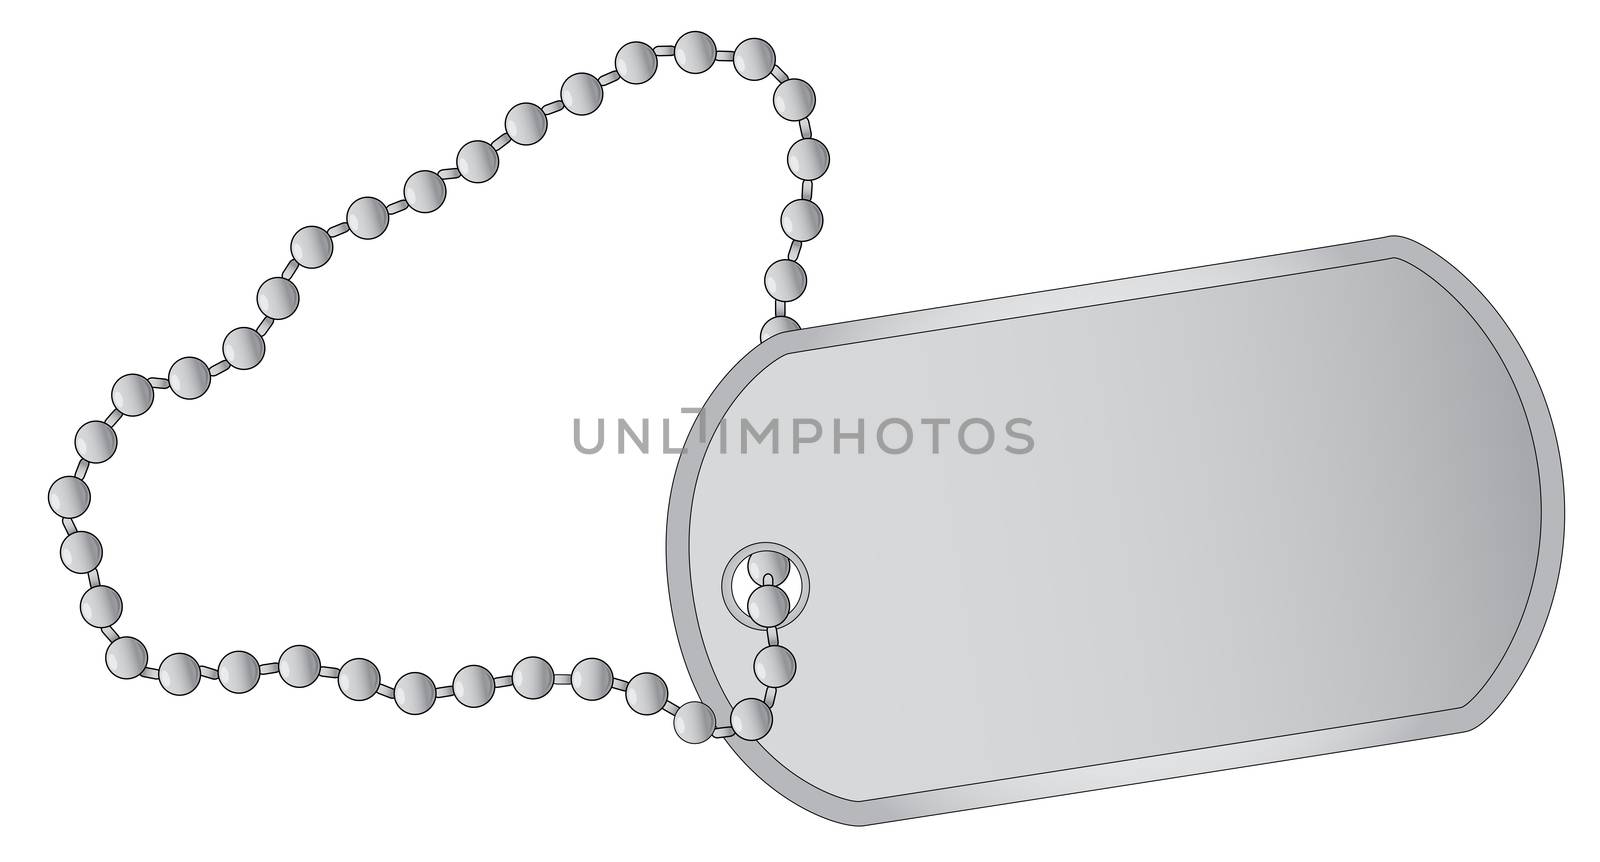 A military style dog tags with chain.